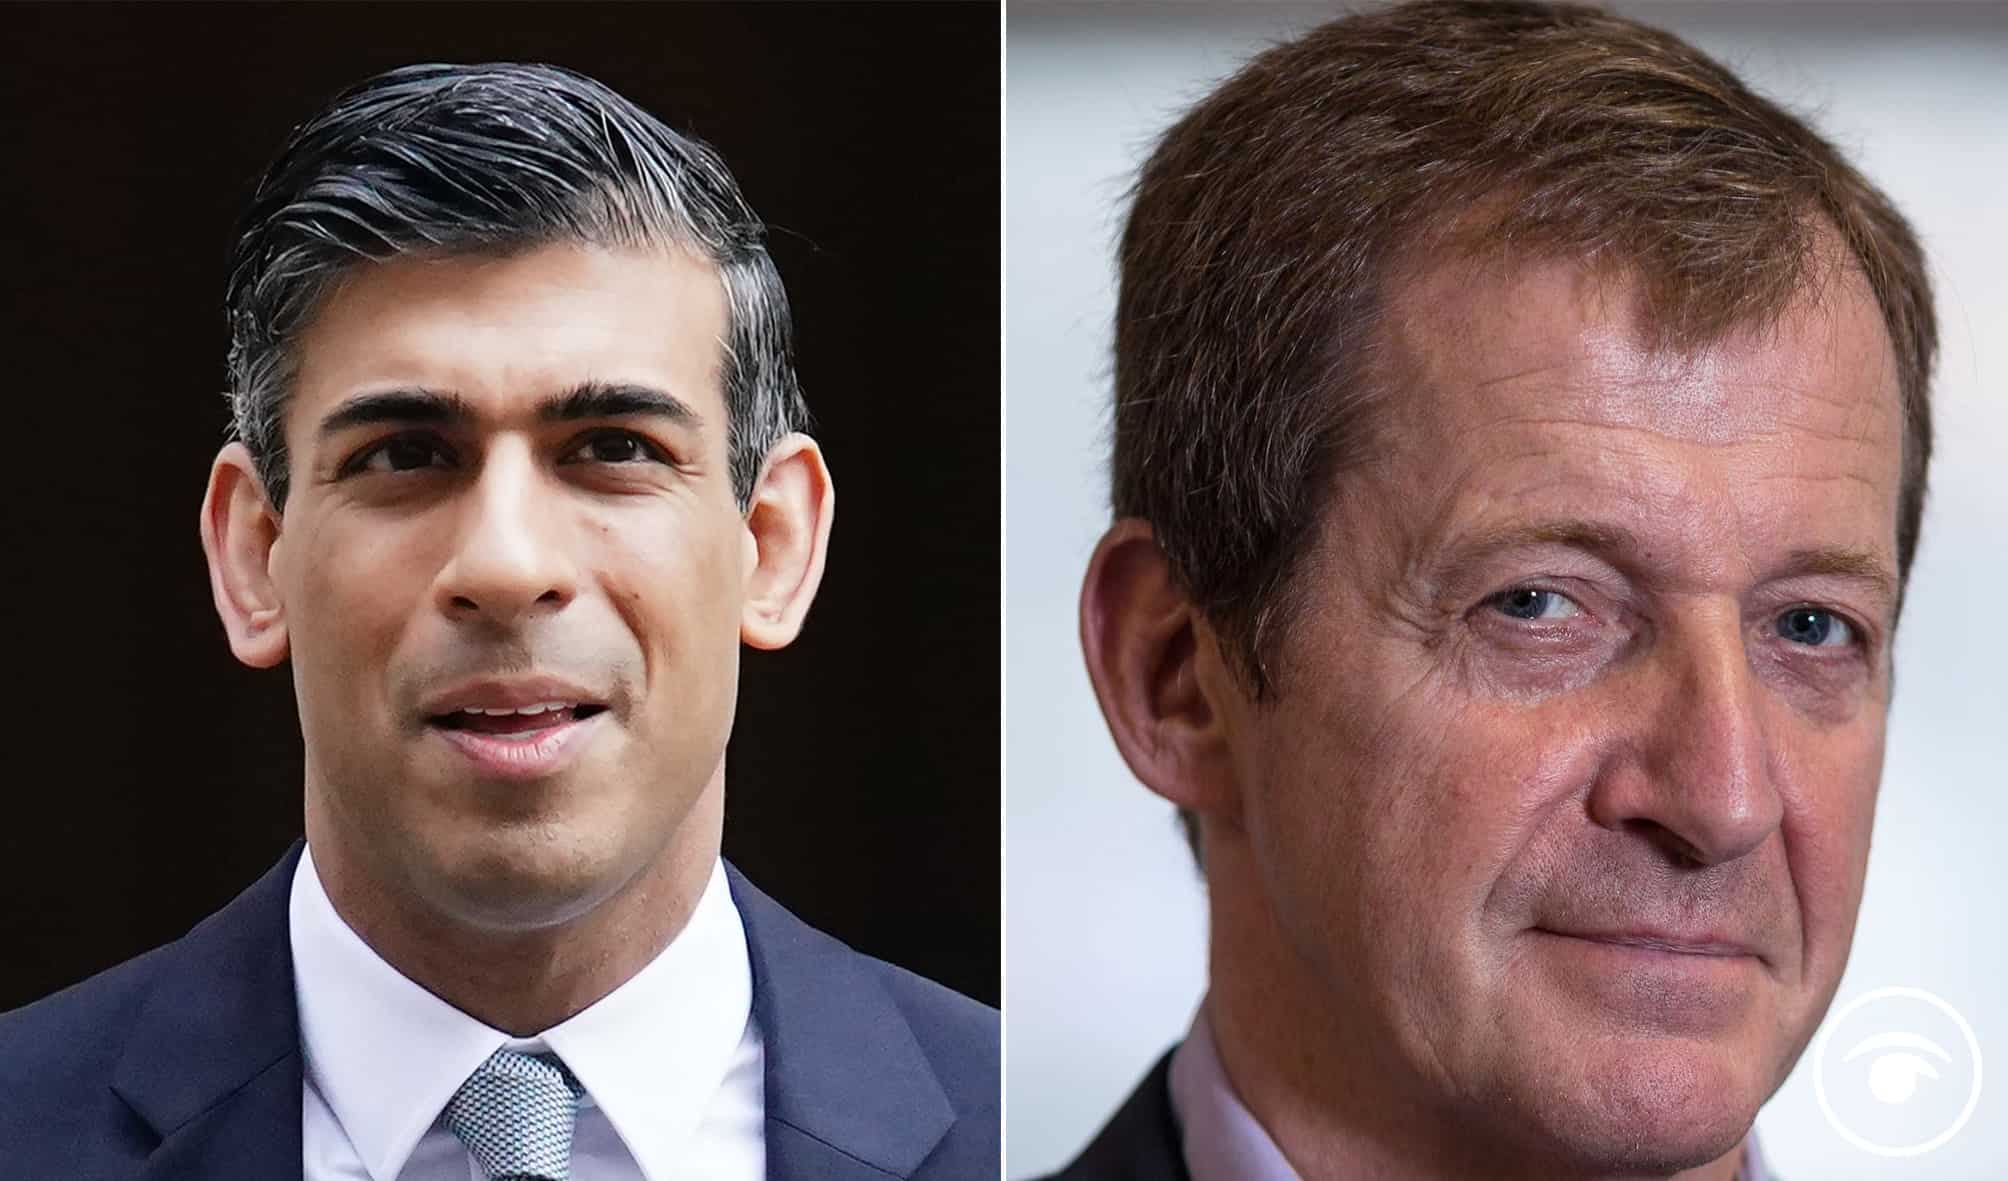 Tax scandal: Has Alastair Campbell nailed Brexit question Rishi Sunak should be asked?